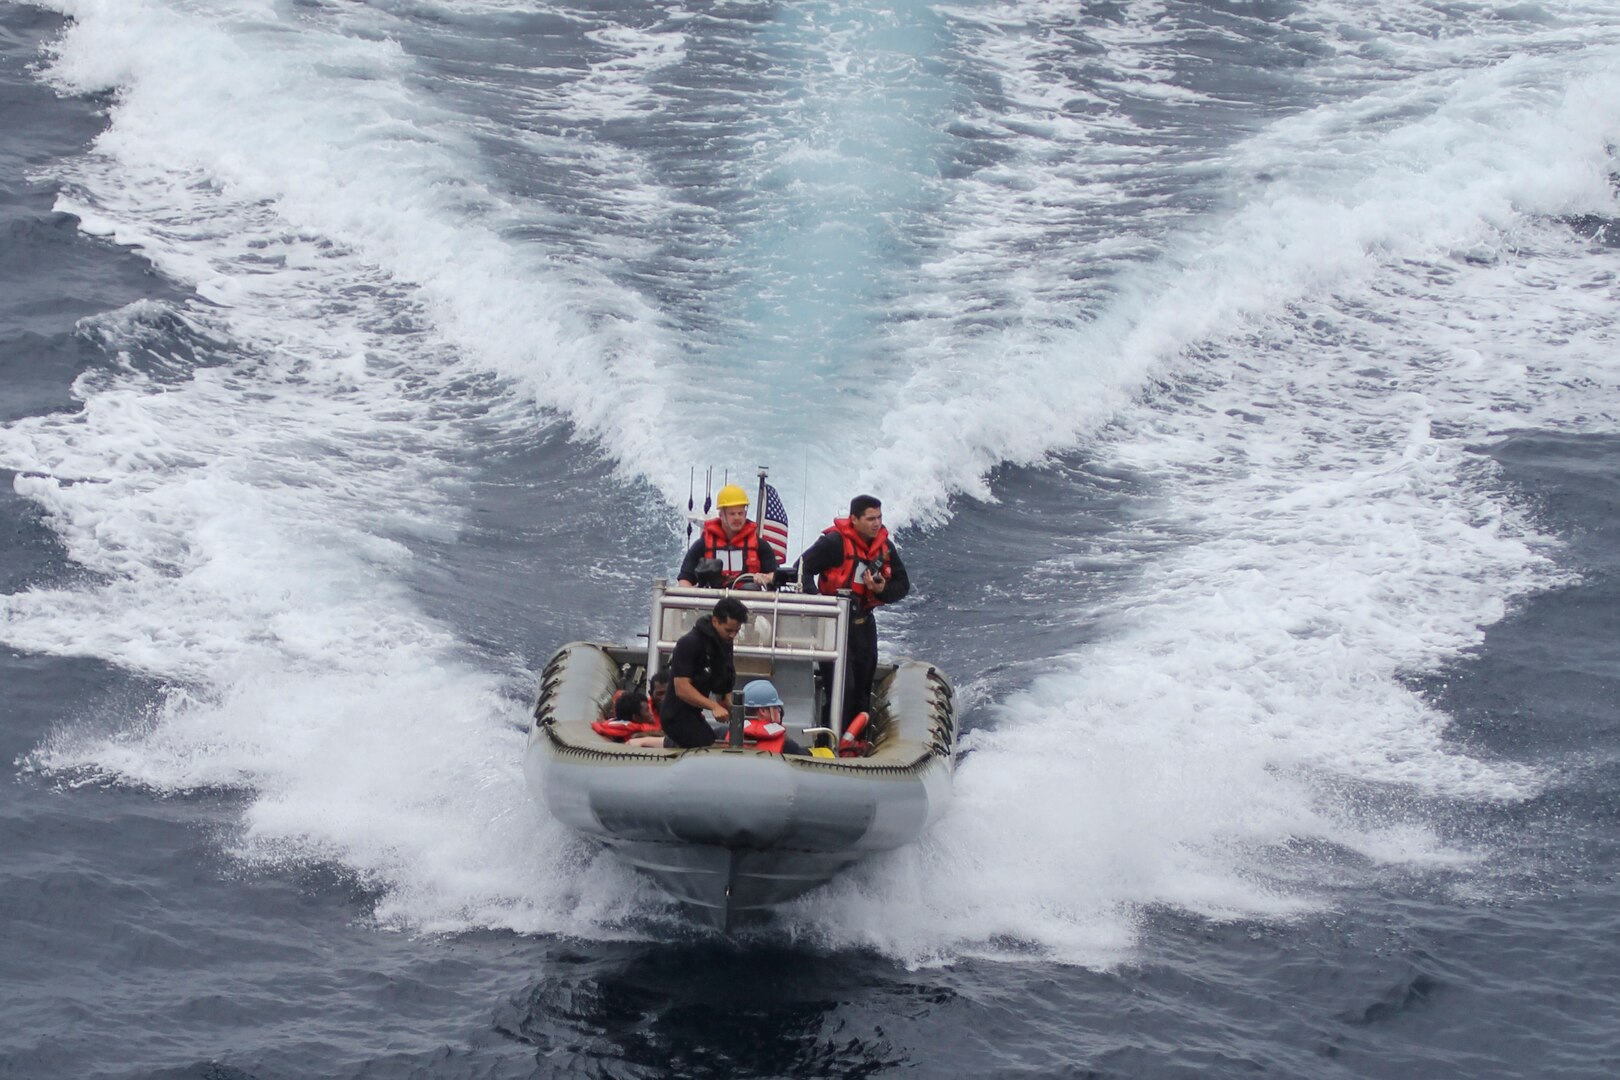 150619-N-ZZ999-003 CELEBES SEA (June 19, 2015) The crew of a rigid hull inflatable boat from the amphibious transport dock ship USS Green Bay (LPD 20) rescues Indonesians who were trapped on a raft at sea. Green Bay is assigned to the Bonhomme Richard Expeditionary Strike Group and is on patrol in the U.S. 7th Fleet area of operations. (Official U.S. Navy photo/Released)